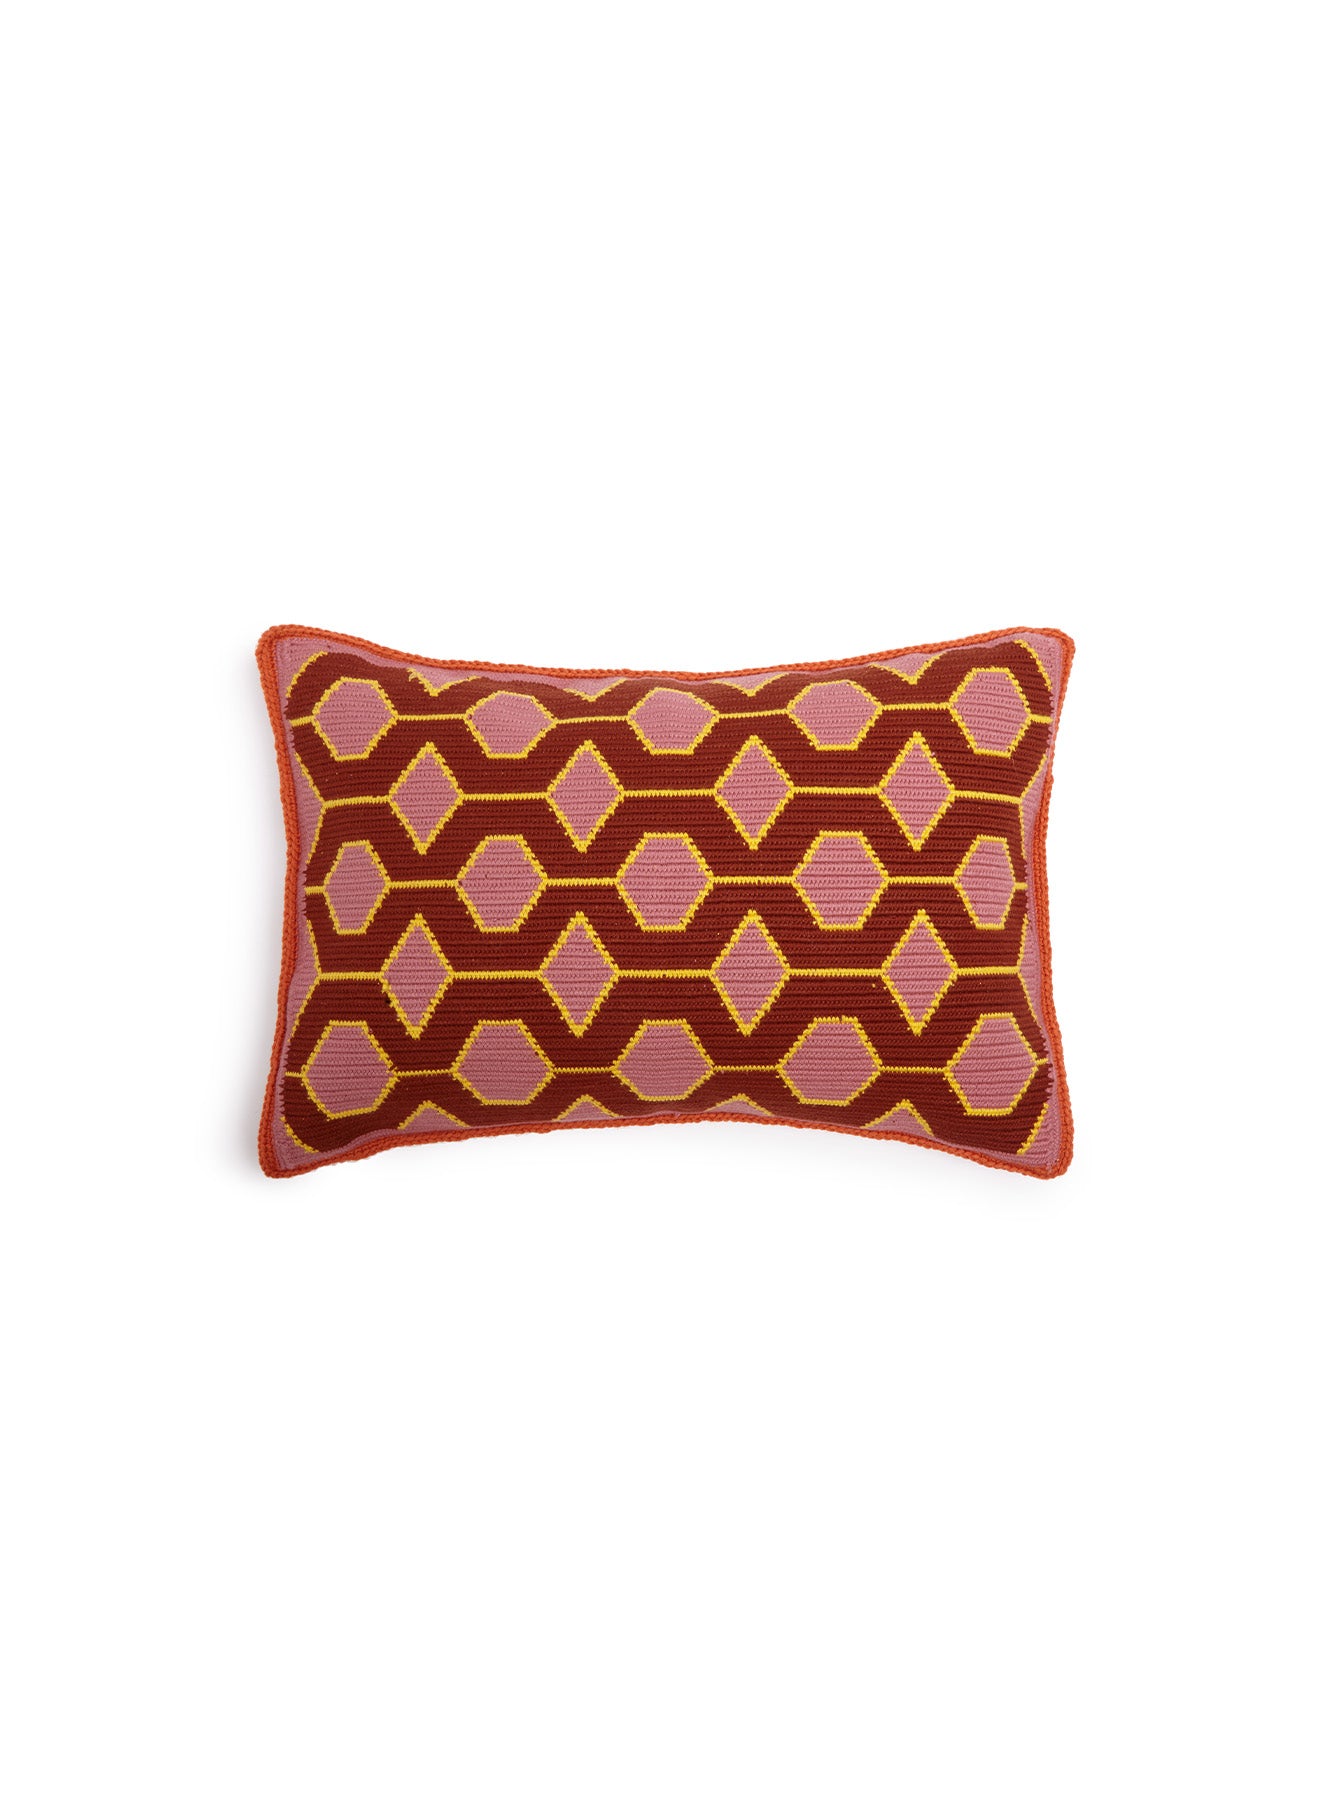 Kentin Geometric Shapes Cotton Throw Pillow Union Rustic Color: Brown